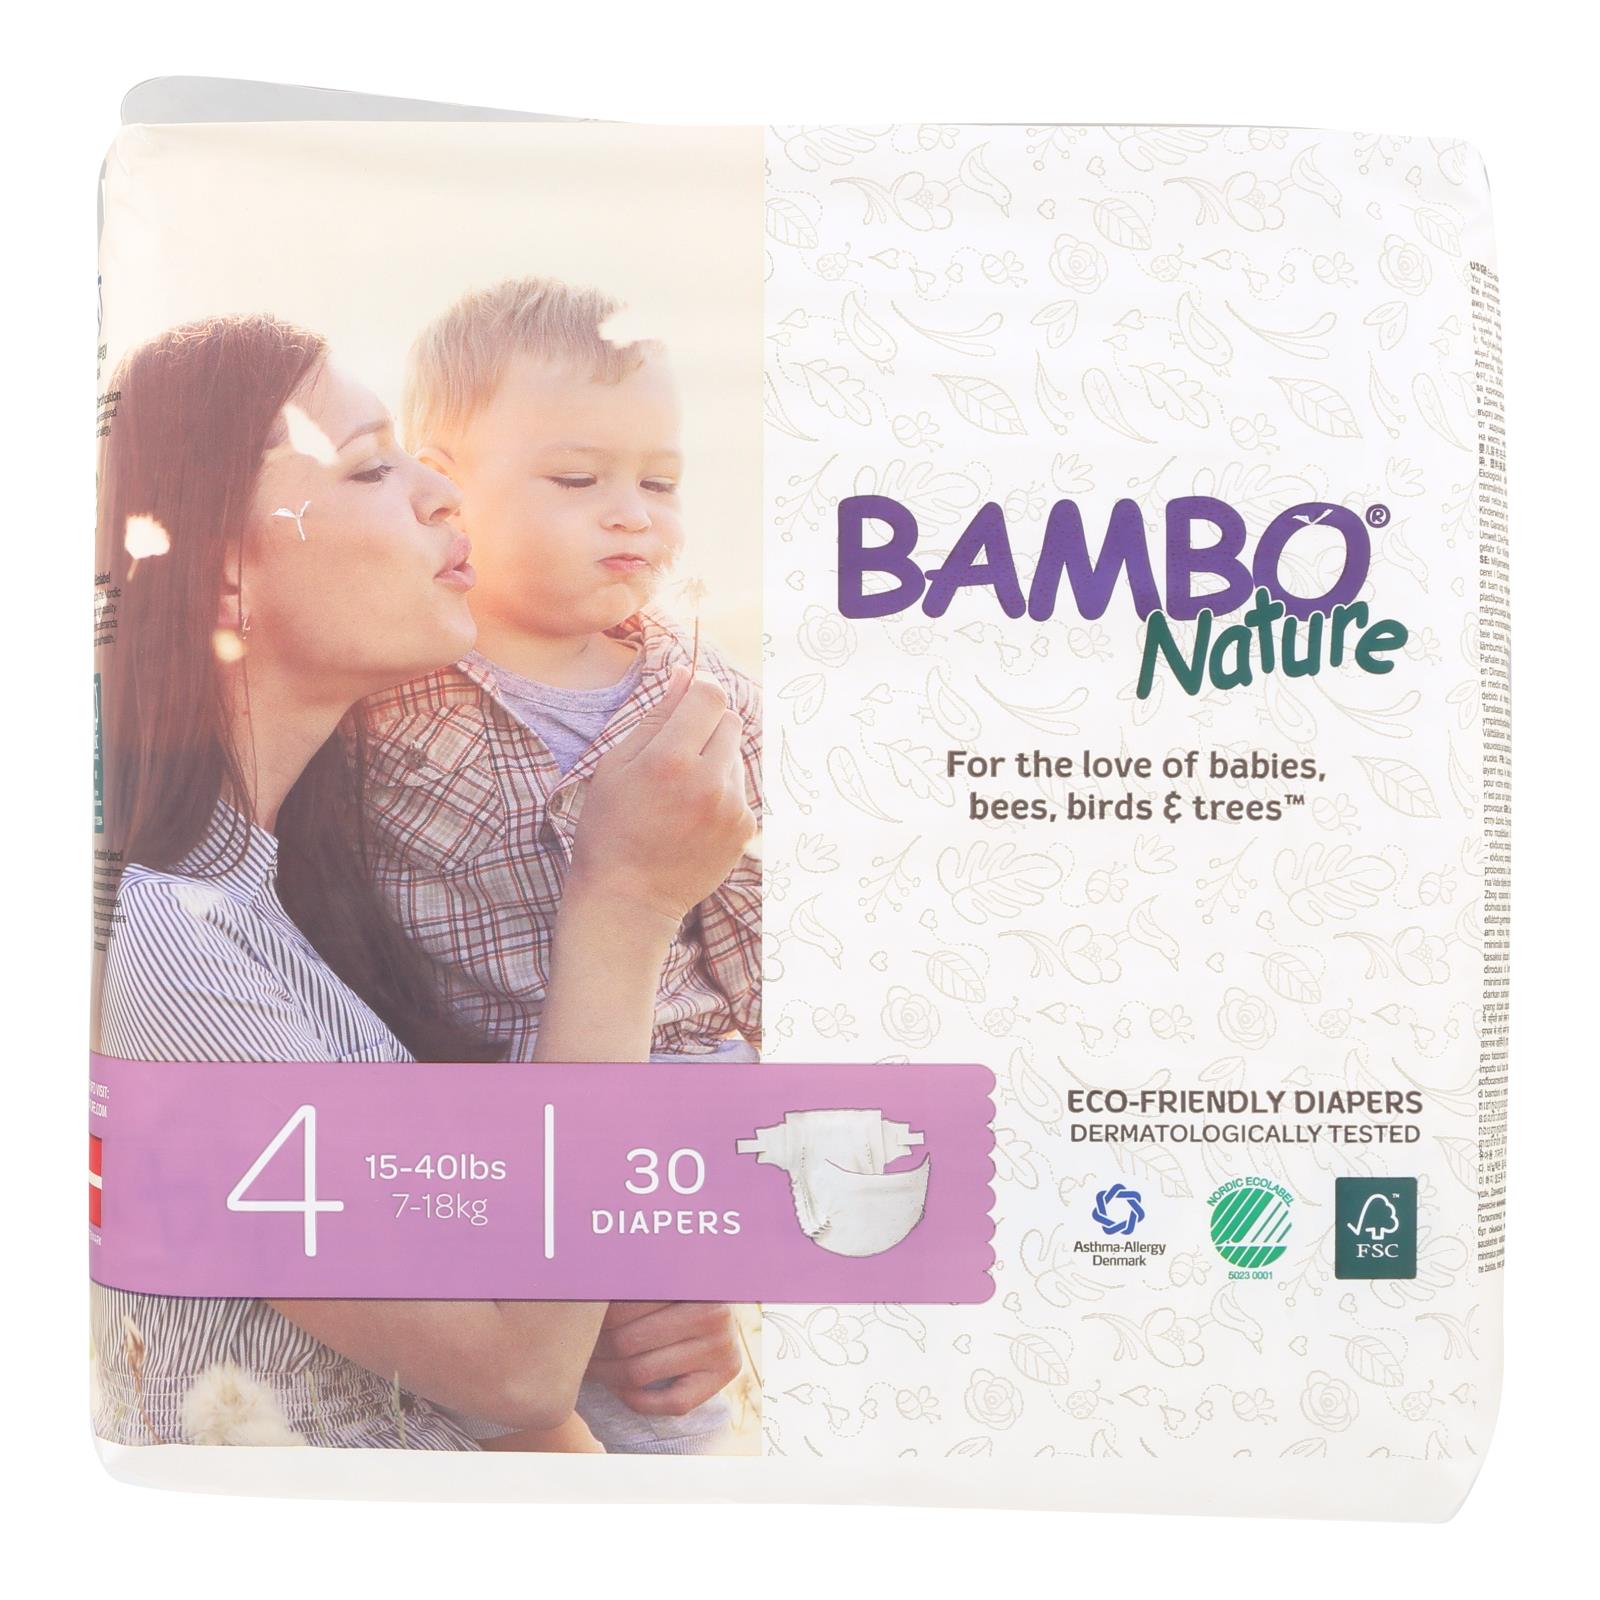 Bambo Nature, Bambo Nature Eco-Friendly Diapers  - Case of 6 - 30 CT (Pack of 6)